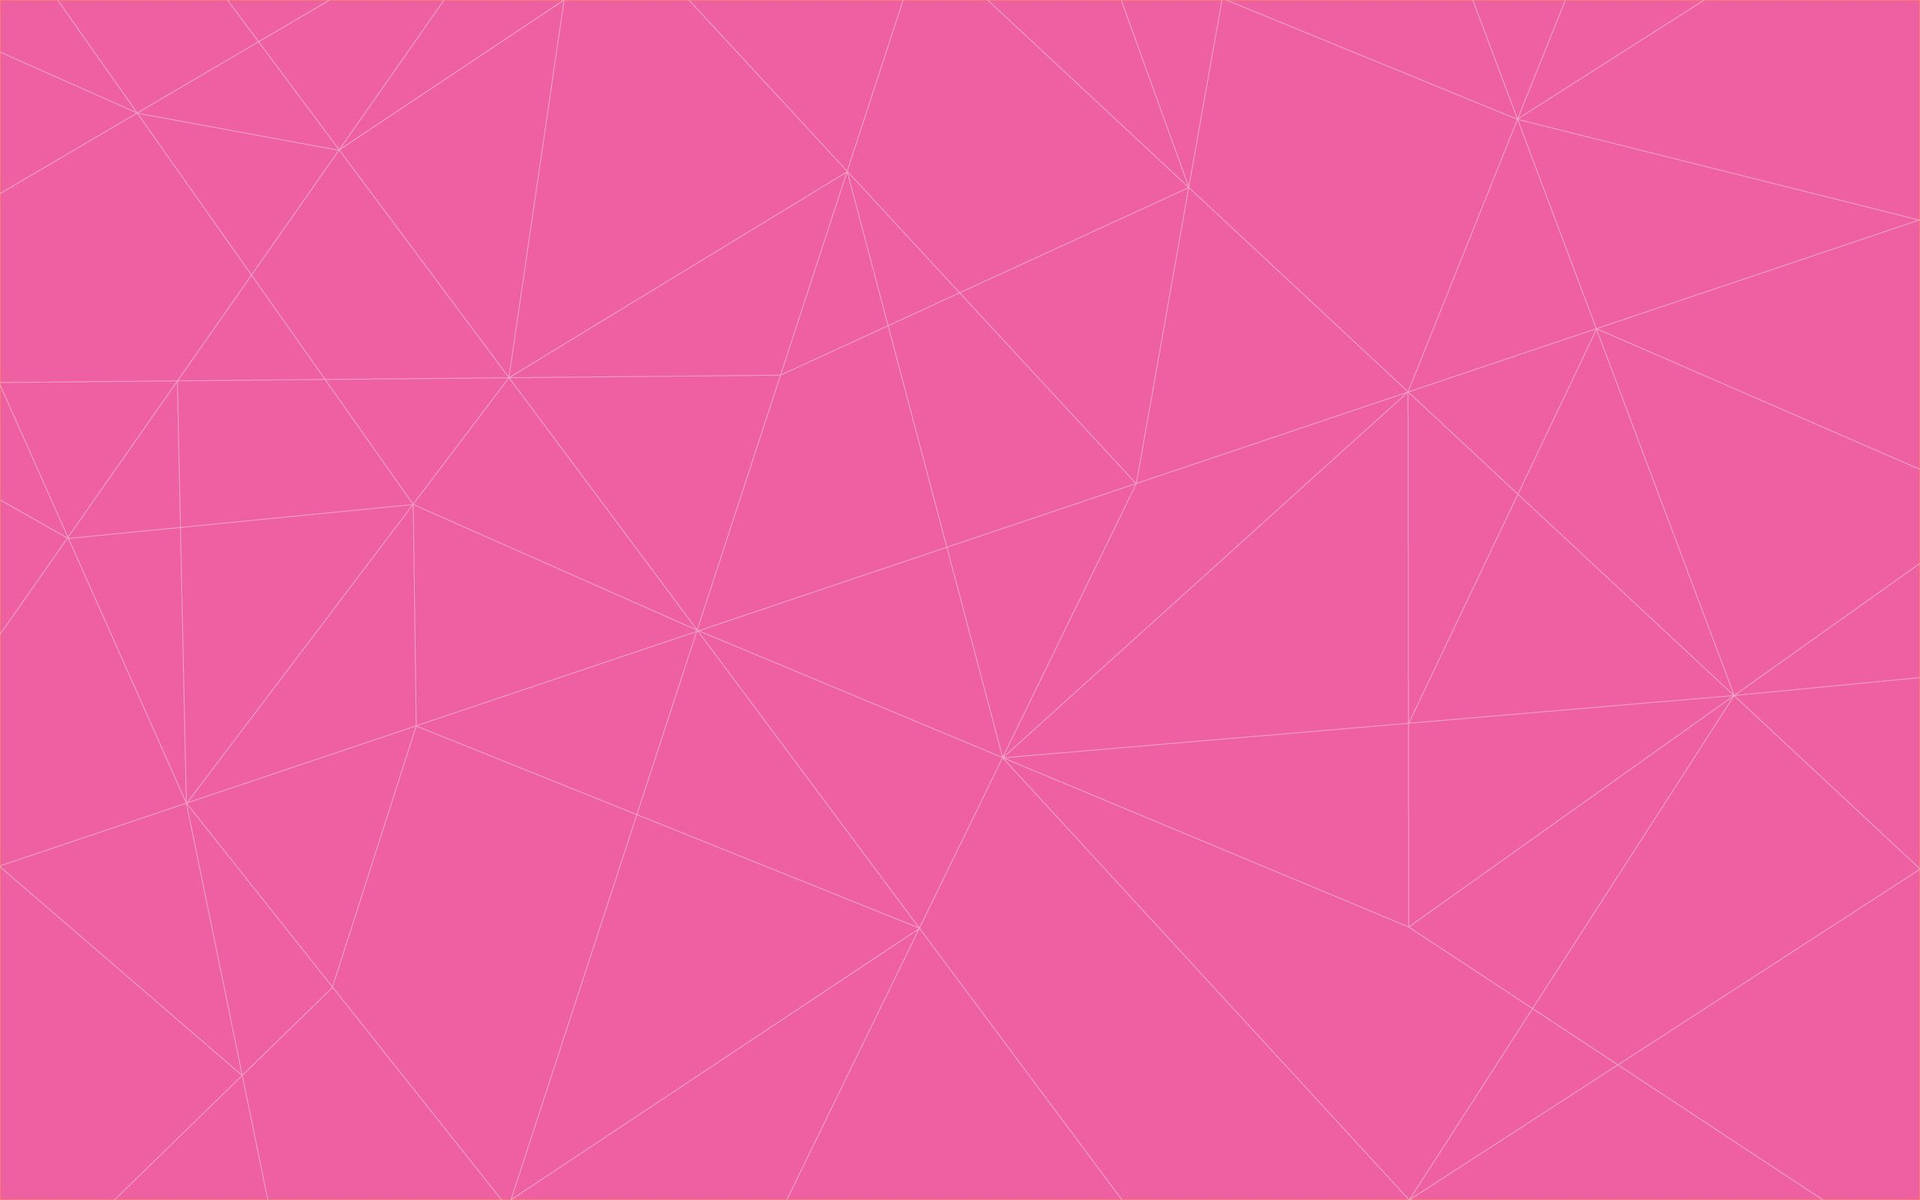 Pink Color With Geometric Lines Background